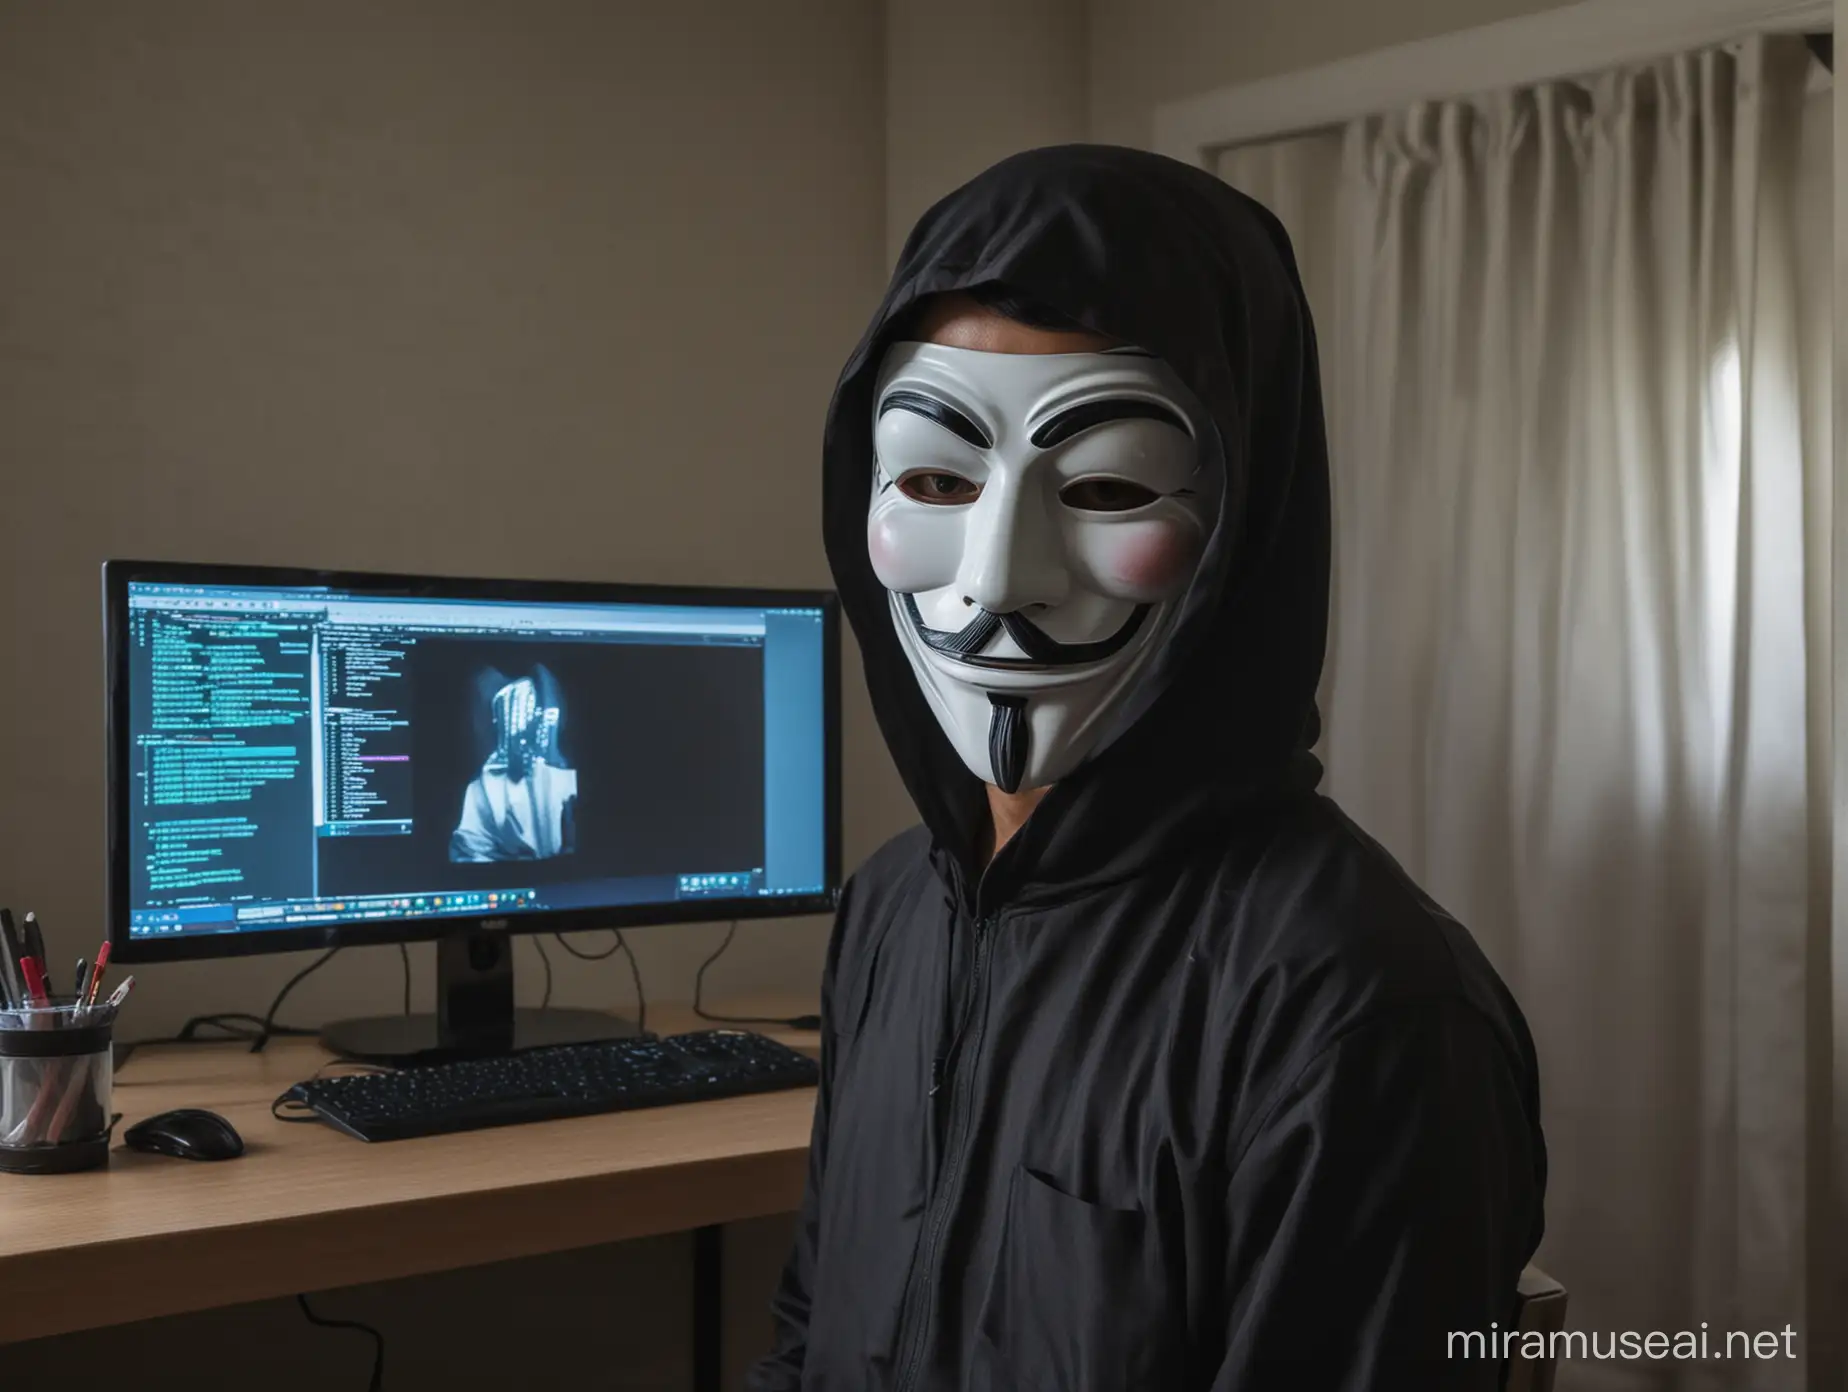 Indonesian man wearing an anonymous mask, in front of a PC screen running a hacking site, set in the bedroom.